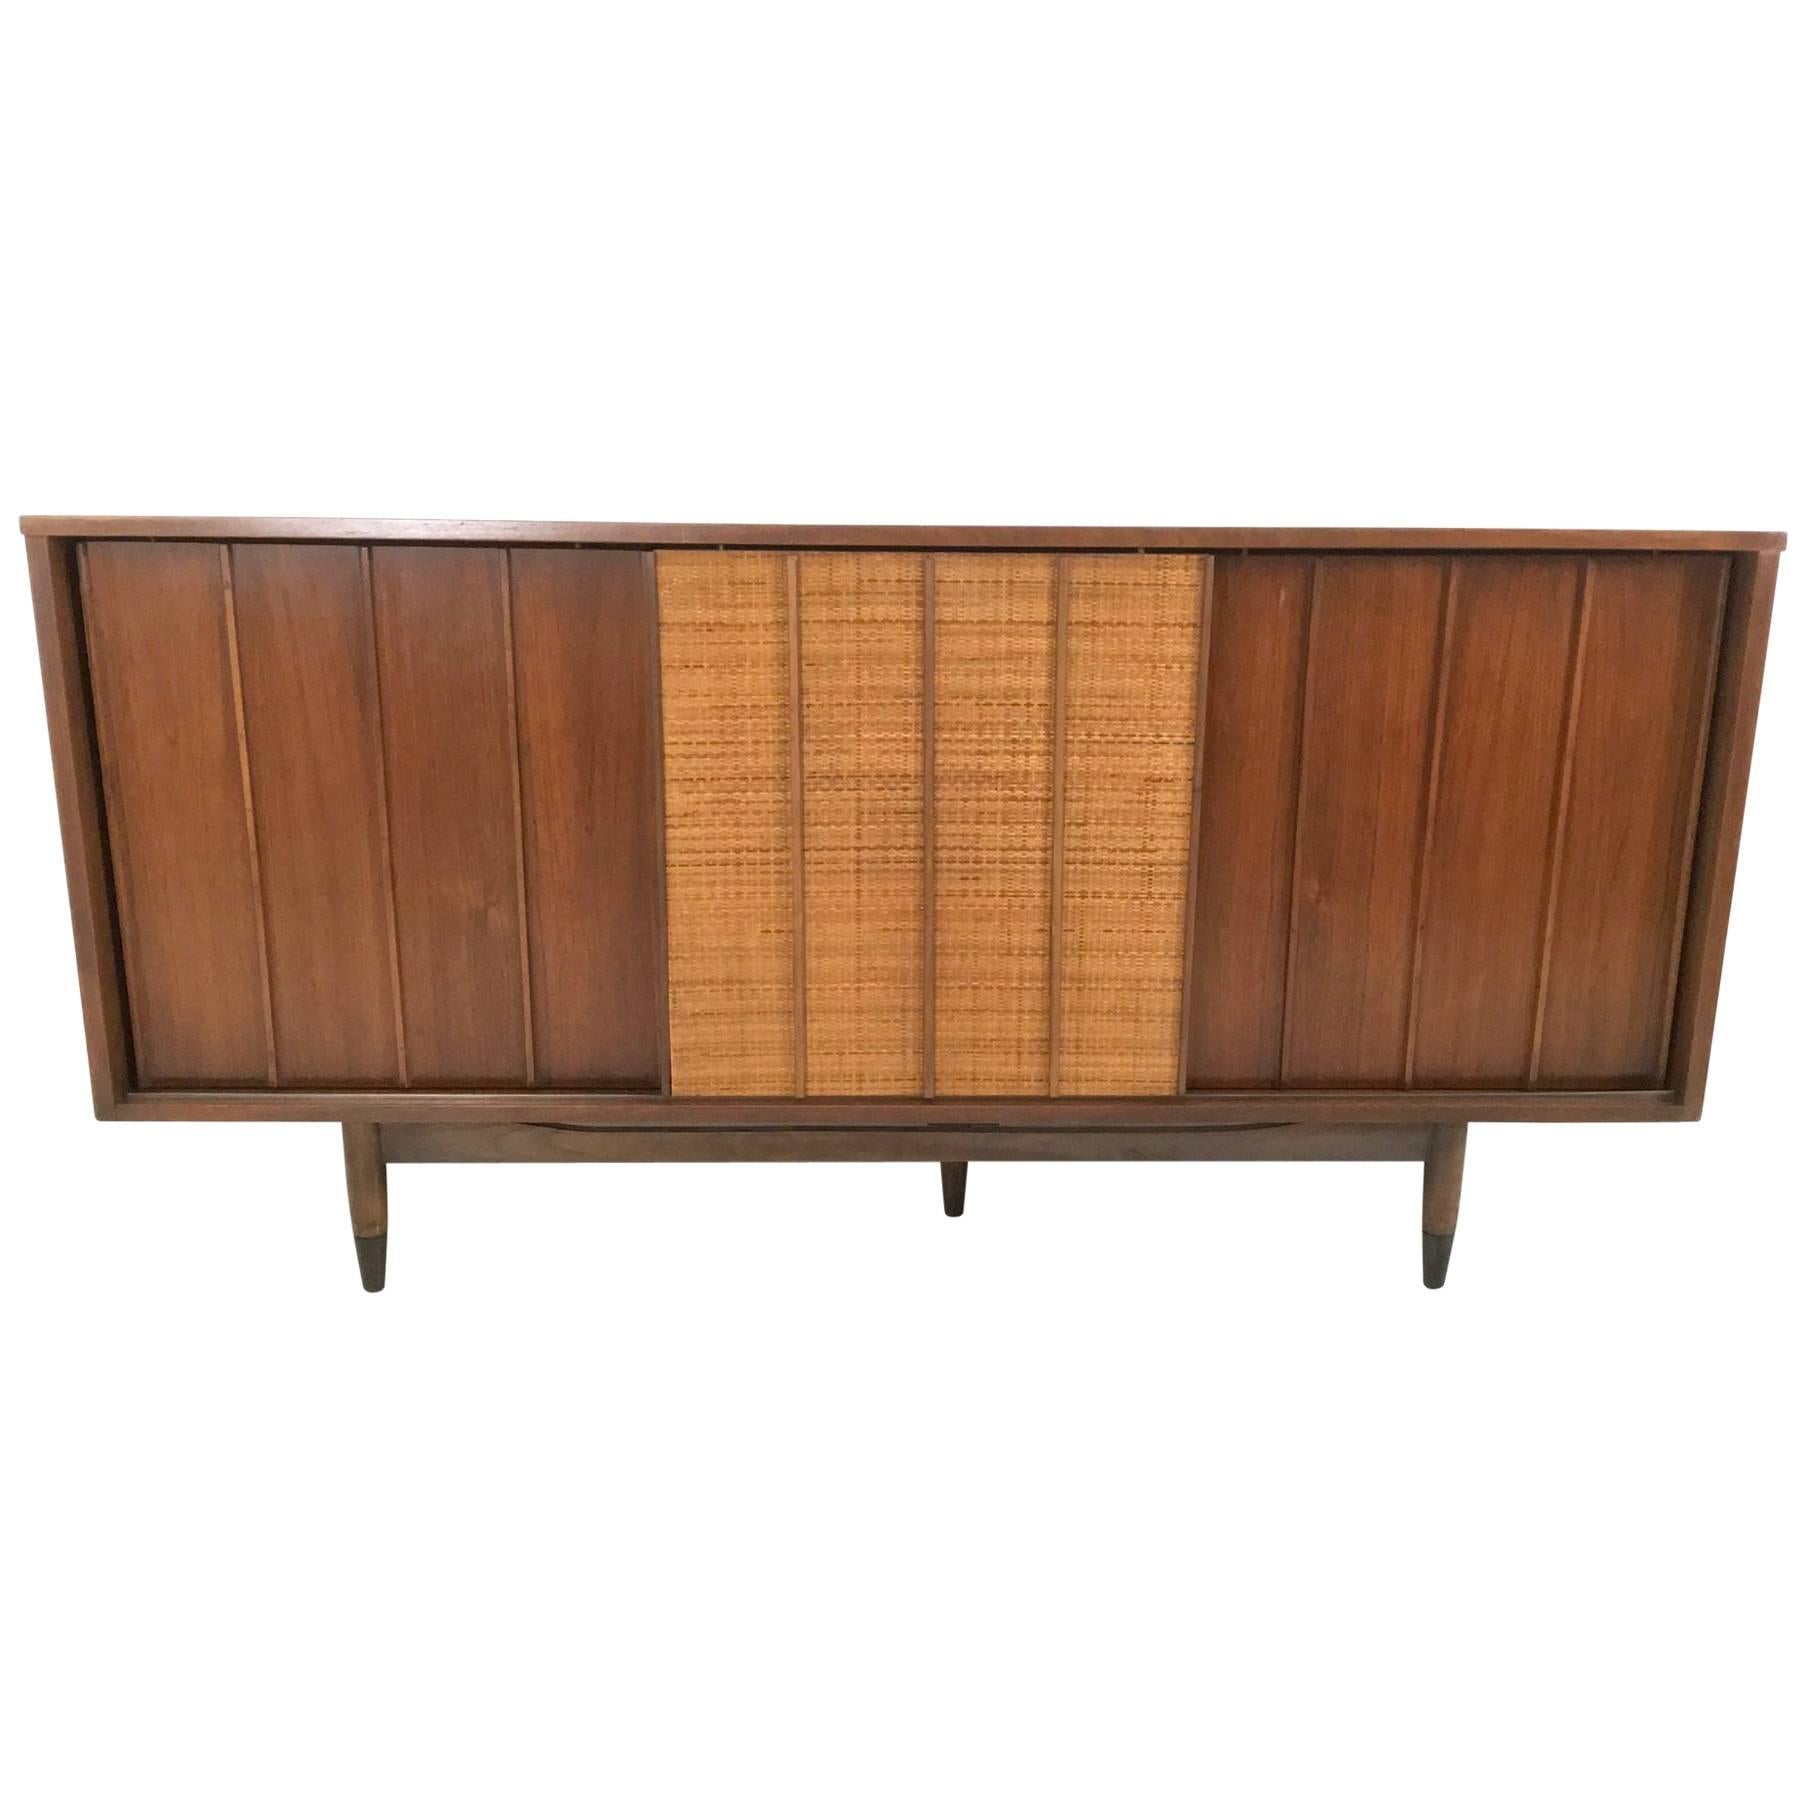 Walnut Sideboard Produced by Mainline with Double, Sided Doors, 1950s-1960s